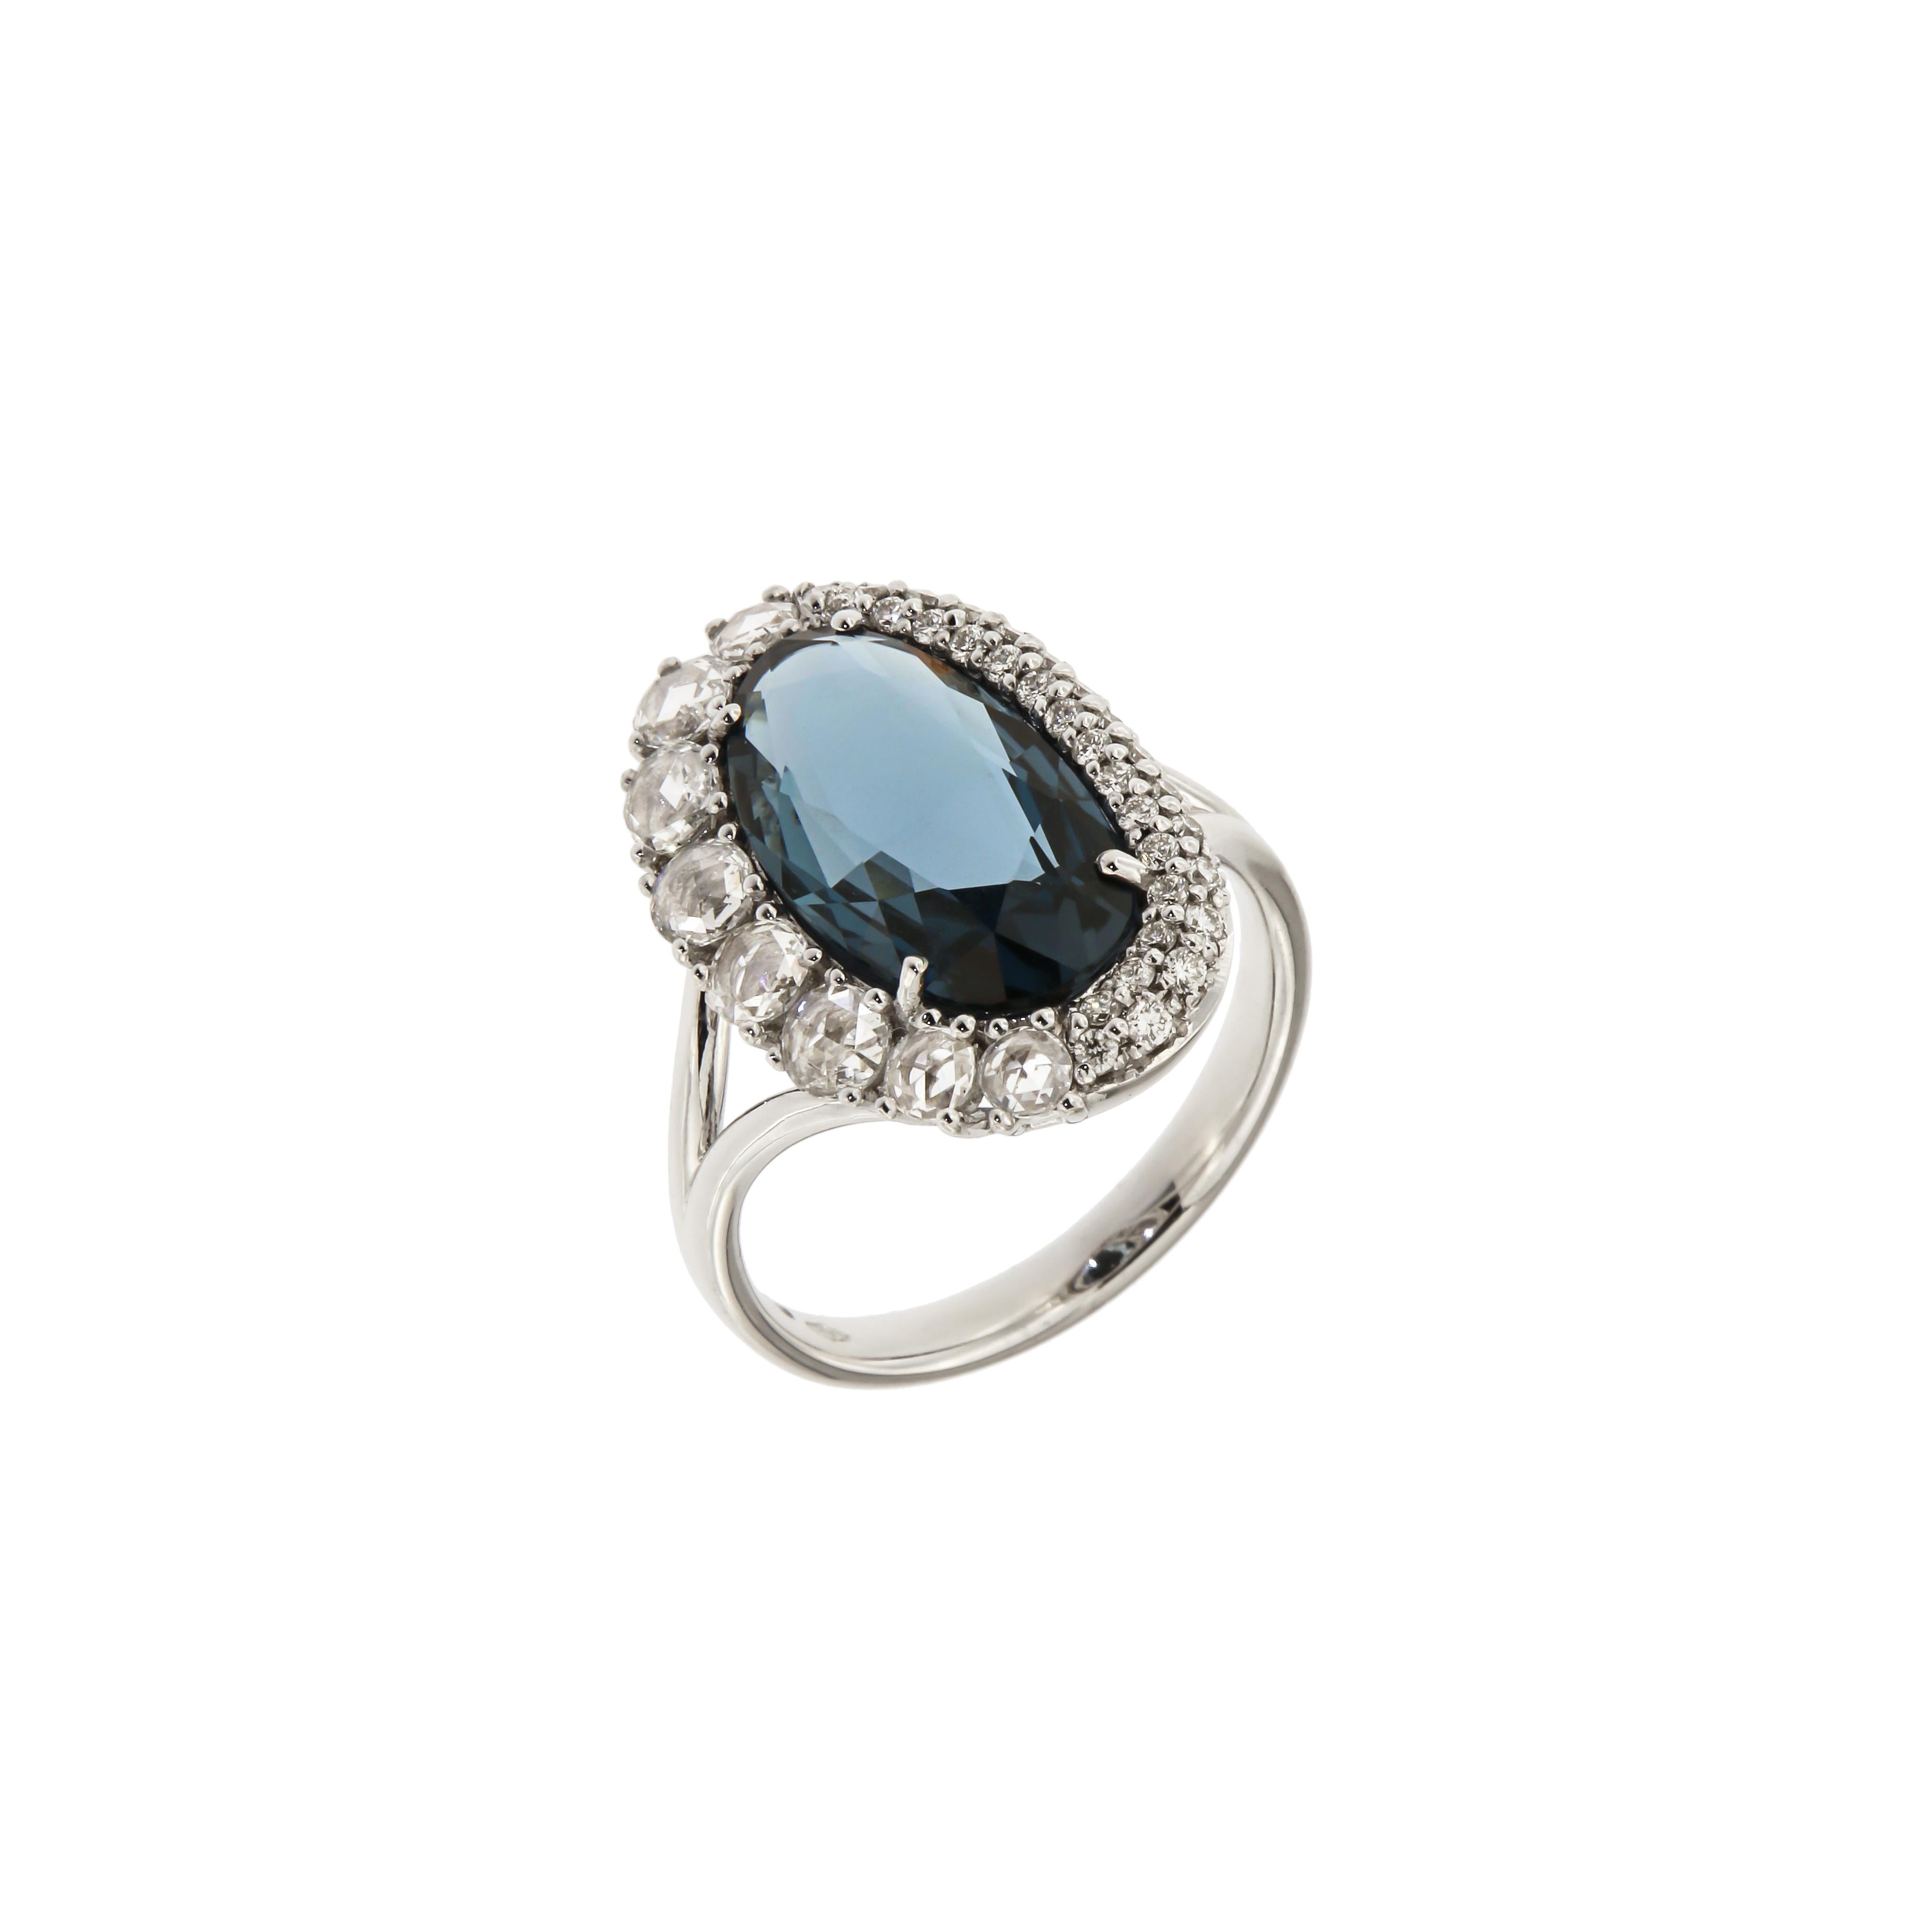 Ring White Gold 18 K (Matching Necklace and Earrings Available)
Diamond 0,78 ct
London Blue Topaz 

Weight 6.30 grams
Different Sizes Available

With a heritage of ancient fine Swiss jewelry traditions, NATKINA is a Geneva based jewellery brand,